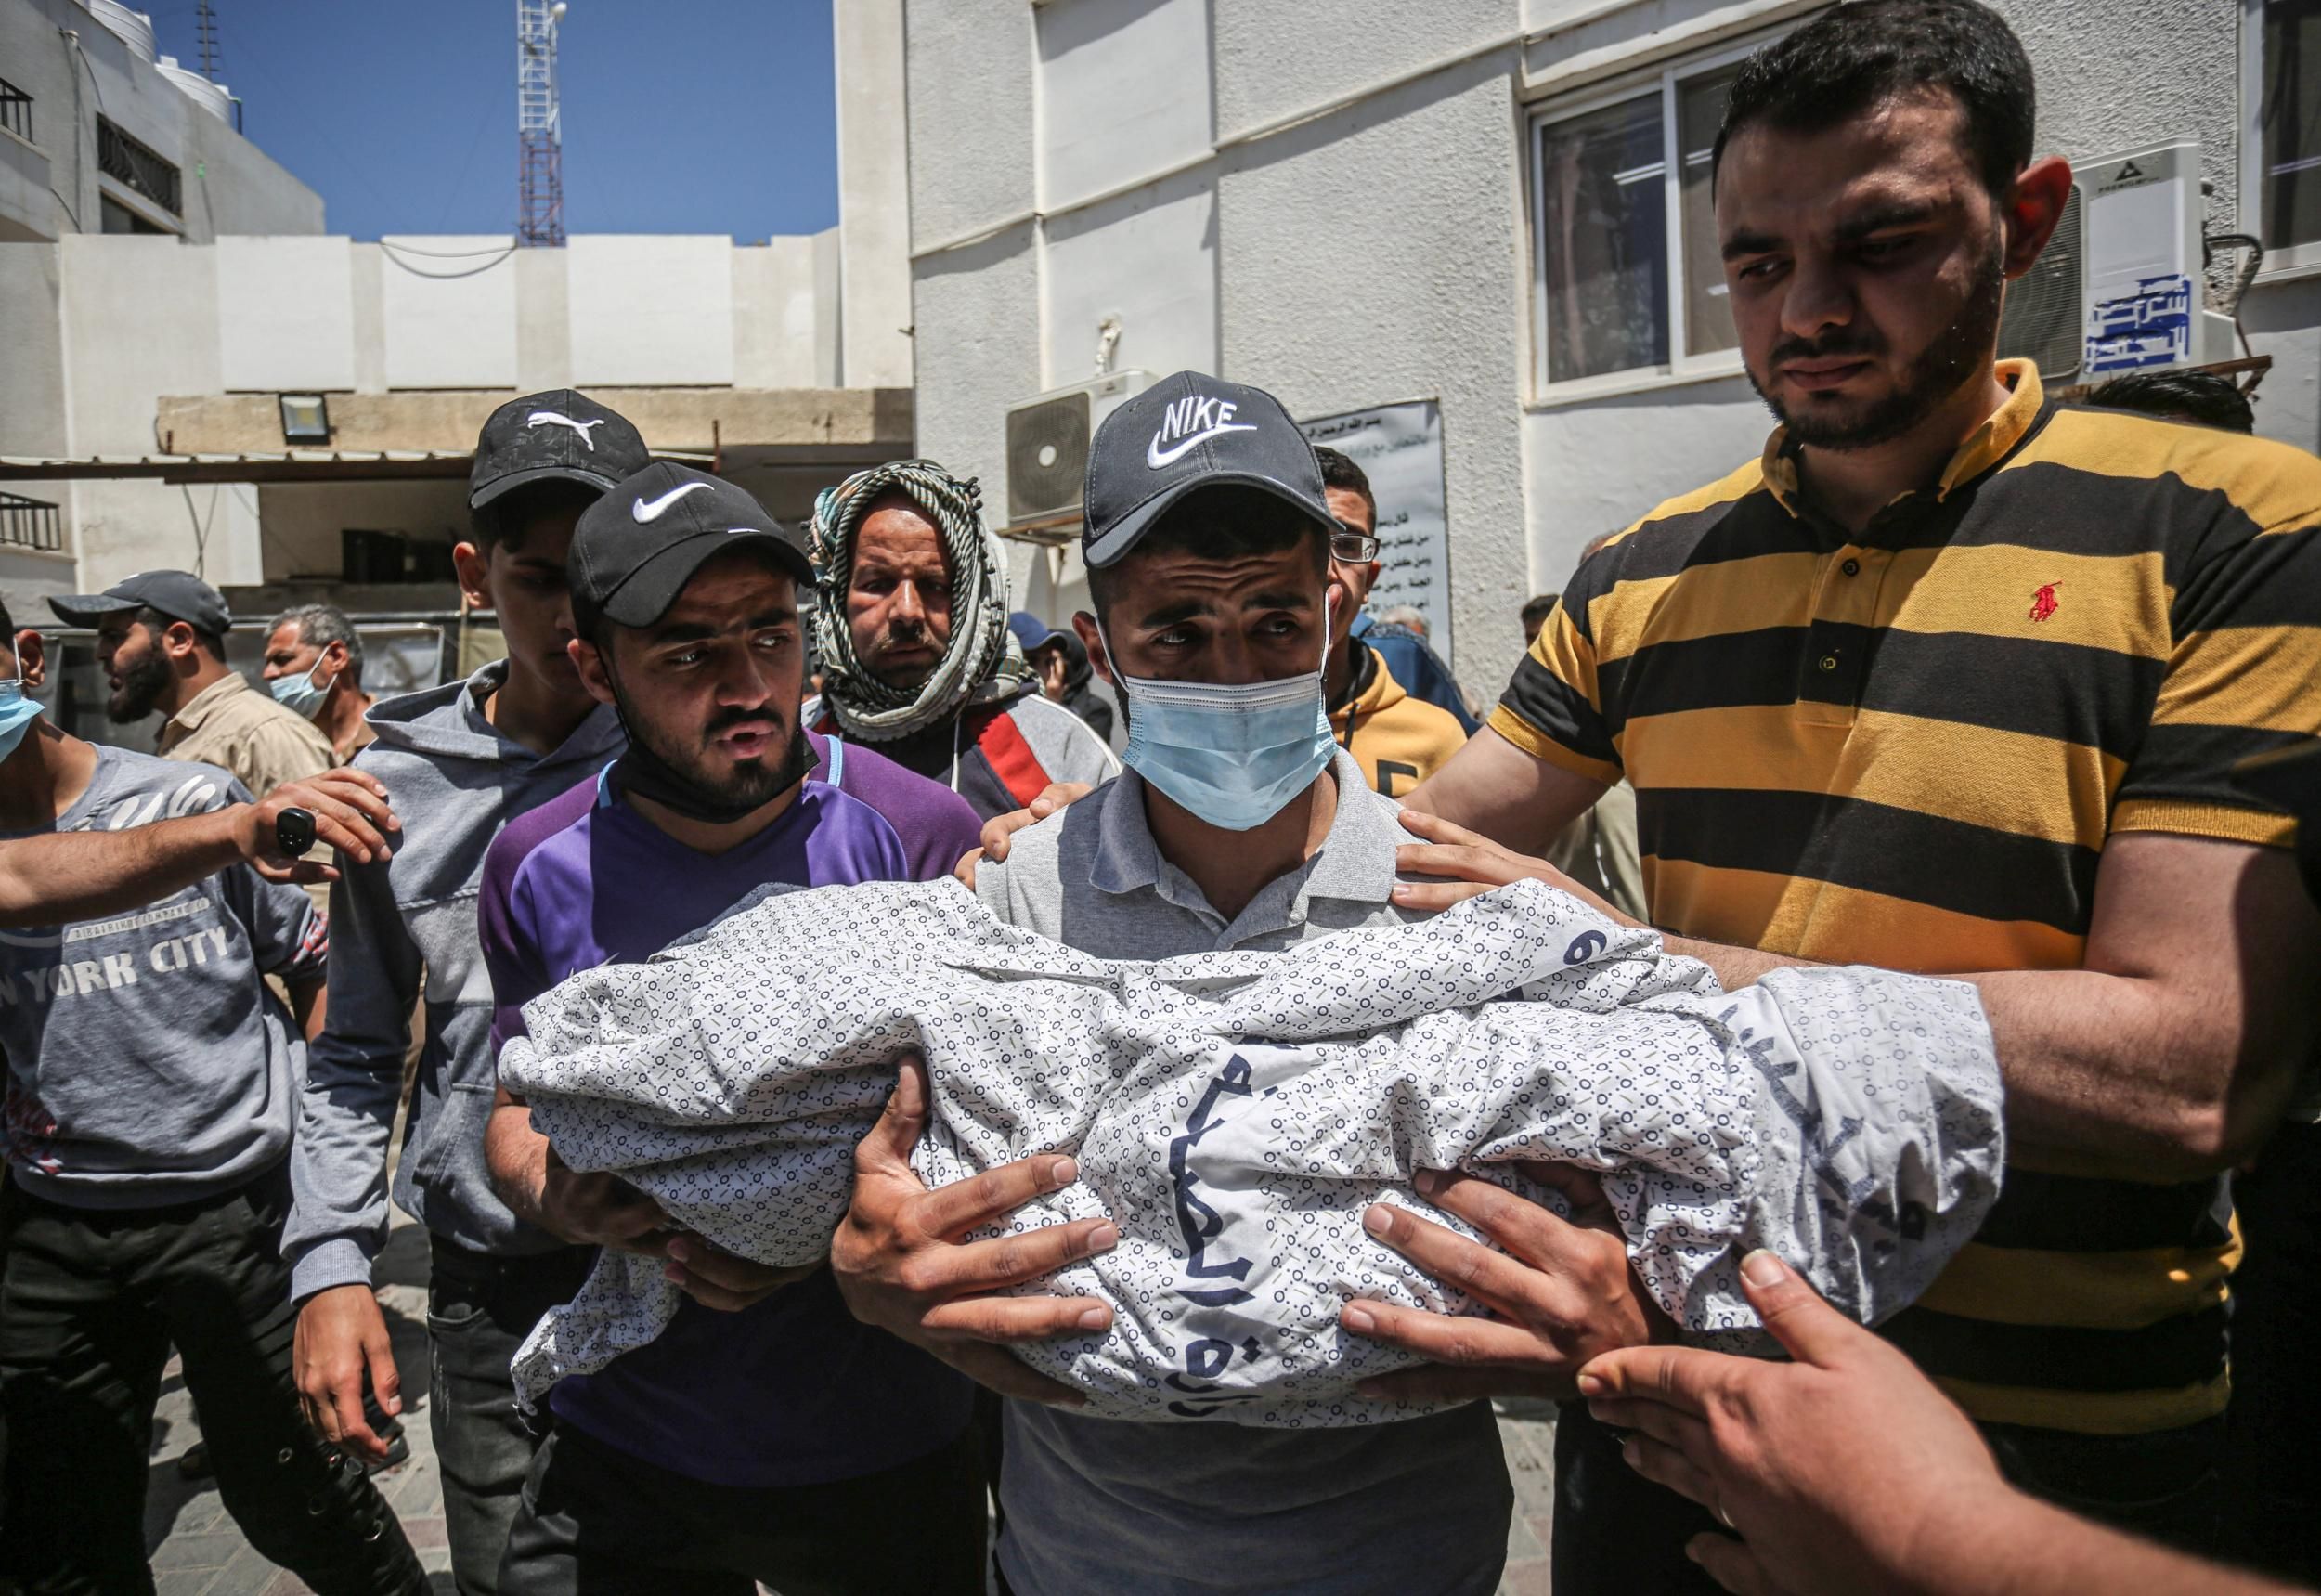 A Palestinian man carries the body of Ibrahim Al-Rantisi, a young child who was killed during an Israeli airstrike, before his burial in Rafah, located in the southern Gaza Strip. (Photo: Yousef Masoud/SOPA Images/LightRocket via Getty Images)